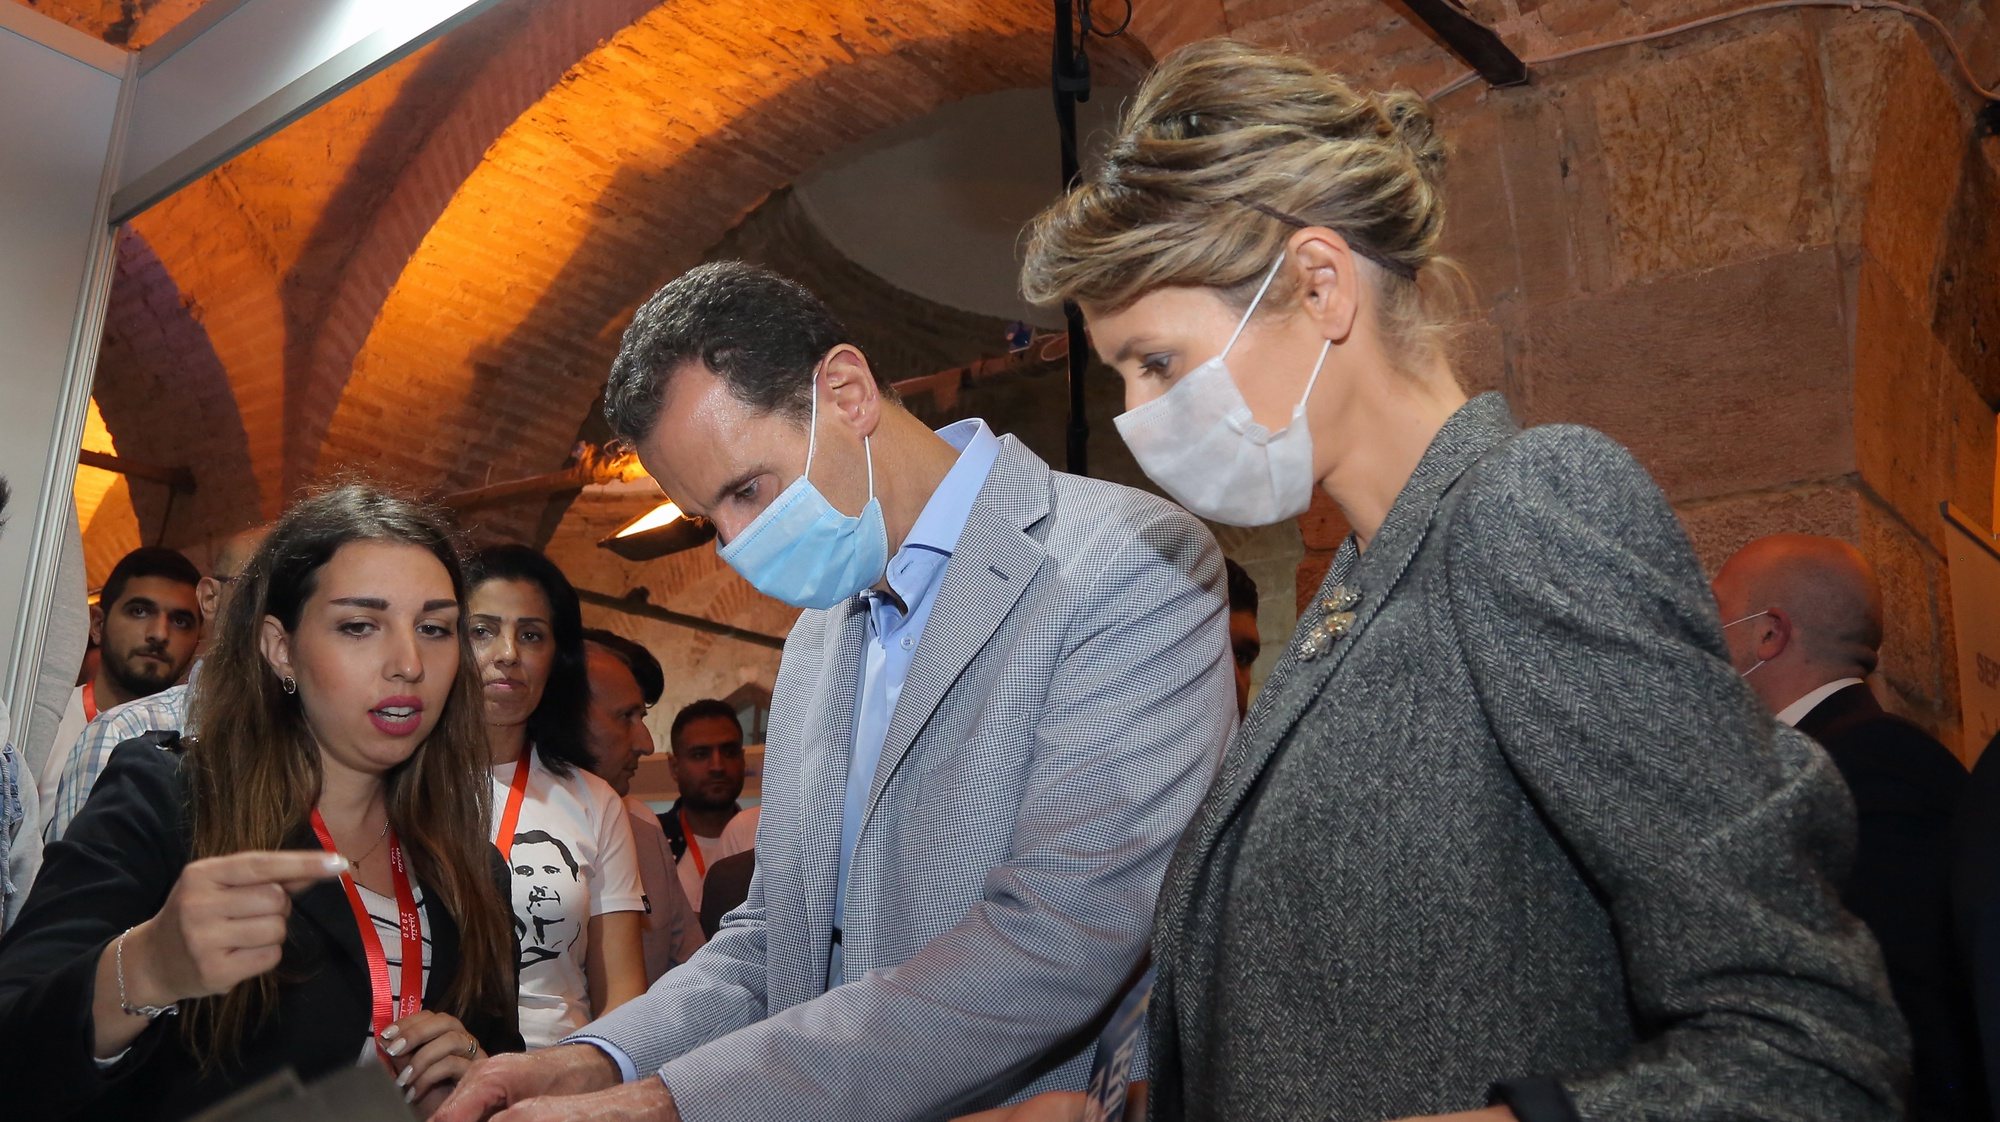 epa08799119 A handout photo made available by the official Syrian Arab News Agency (SANA) shows Syrian President Bashar al-Assad and his wife Asma Assad touring the various sections of the 5-day exhibition Producers 2020 in Tekkiye Sulaymaniya in Damascus, Syria, 04 October 2020. The exhibition is held with the participation of 77 producers from the northern city of Aleppo.  EPA/SANA /HANDOUT  HANDOUT EDITORIAL USE ONLY/NO SALES